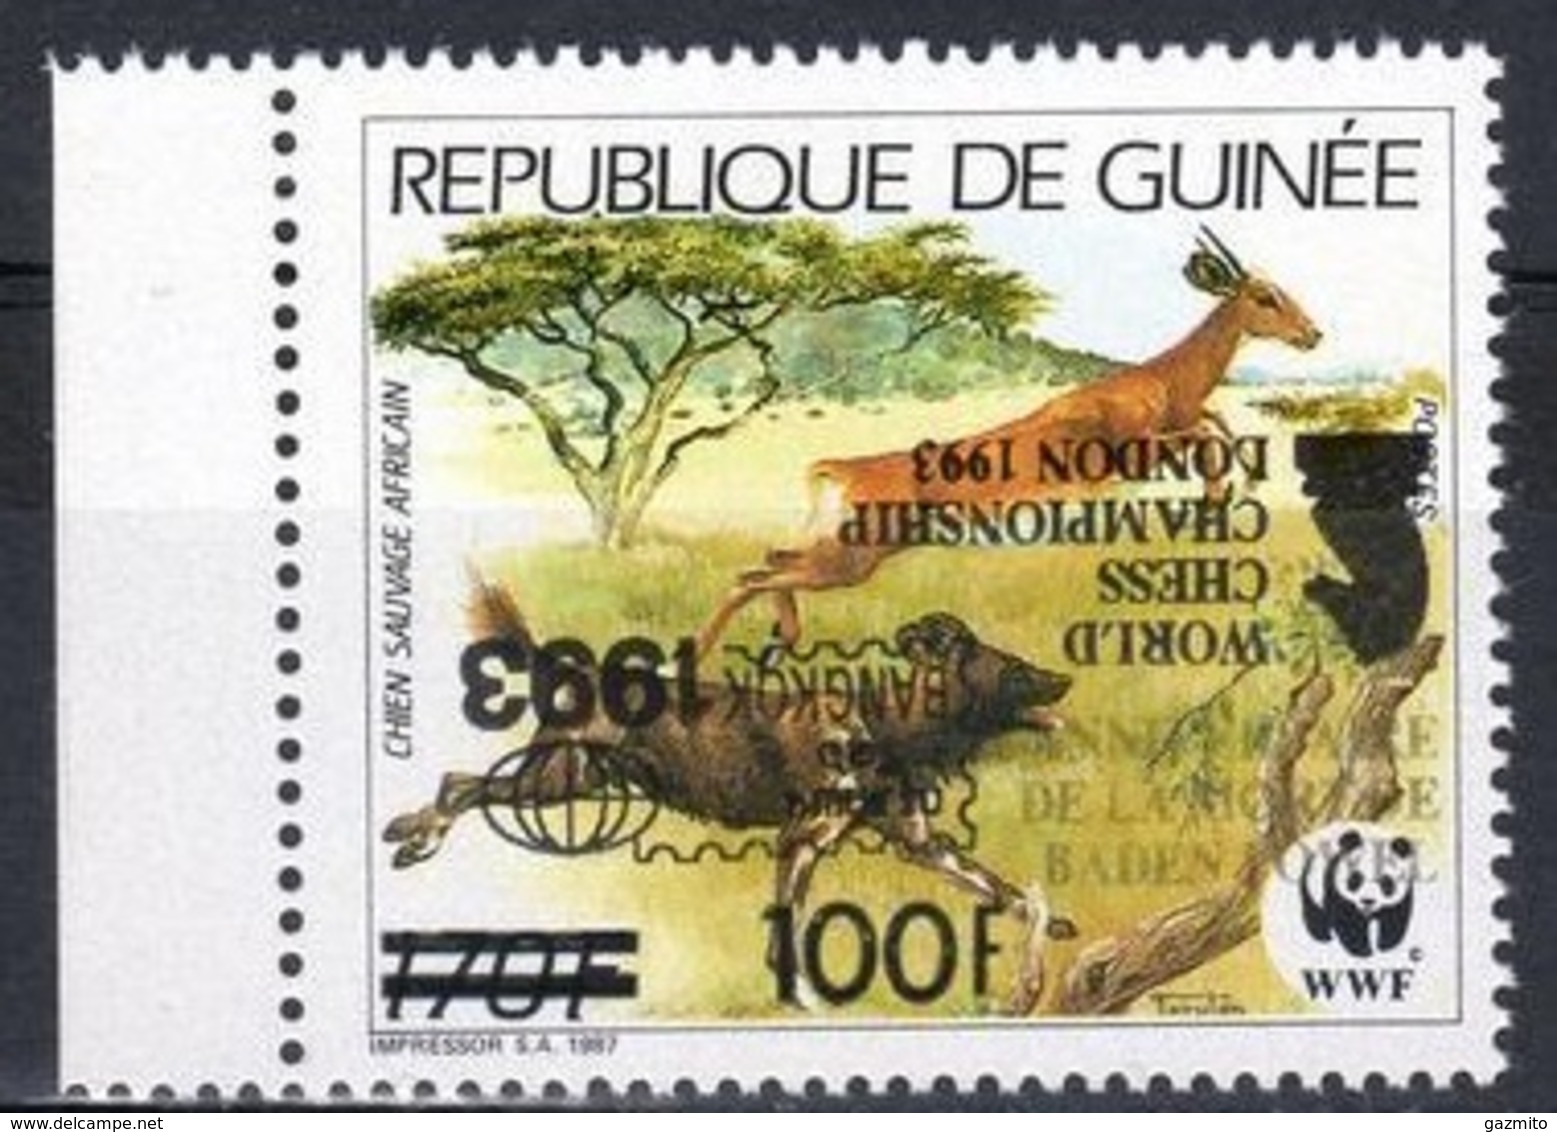 Guinea 1993, WWF Over. Black INVERTED, Chess Championship, Bangkok PhilExpo, Scout, 1val - Chess